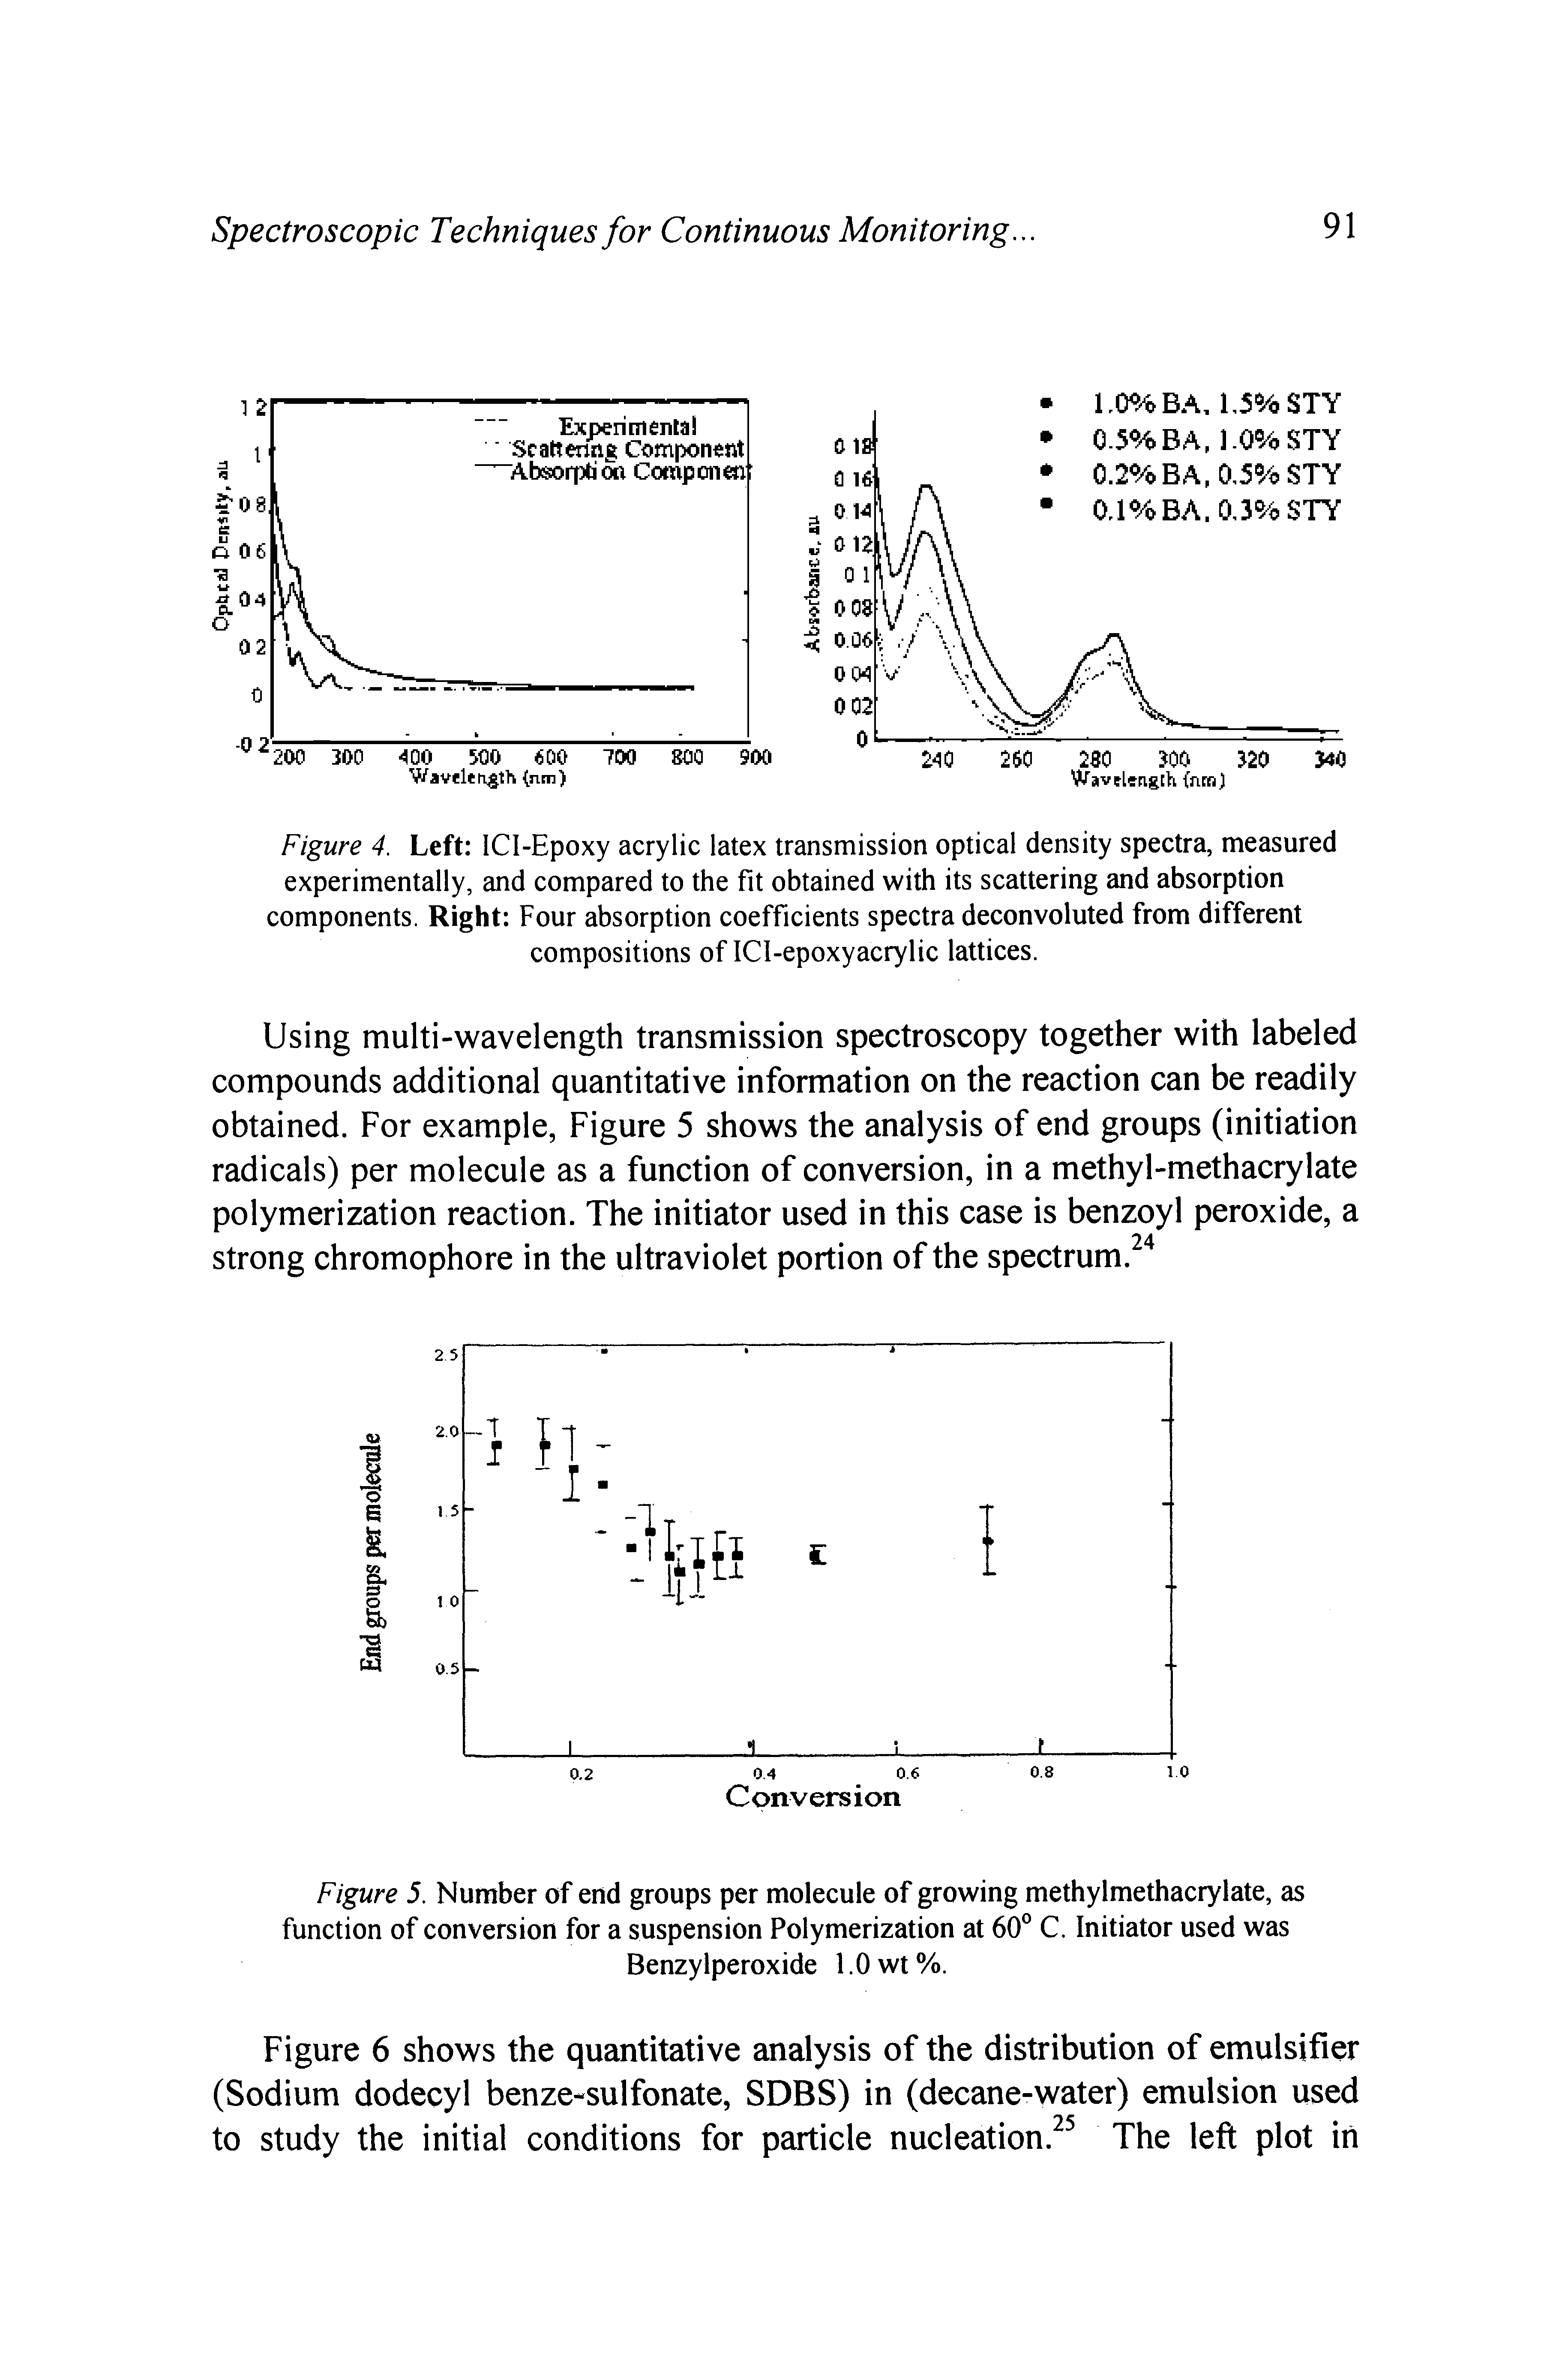 Figure 4. Left ICI-Epoxy acrylic latex transmission optical density spectra, measured experimentally, and compared to the fit obtained with its scattering and absorption components. Right Four absorption coefficients spectra deconvoluted from different compositions of ICI-epoxyacrylic lattices.